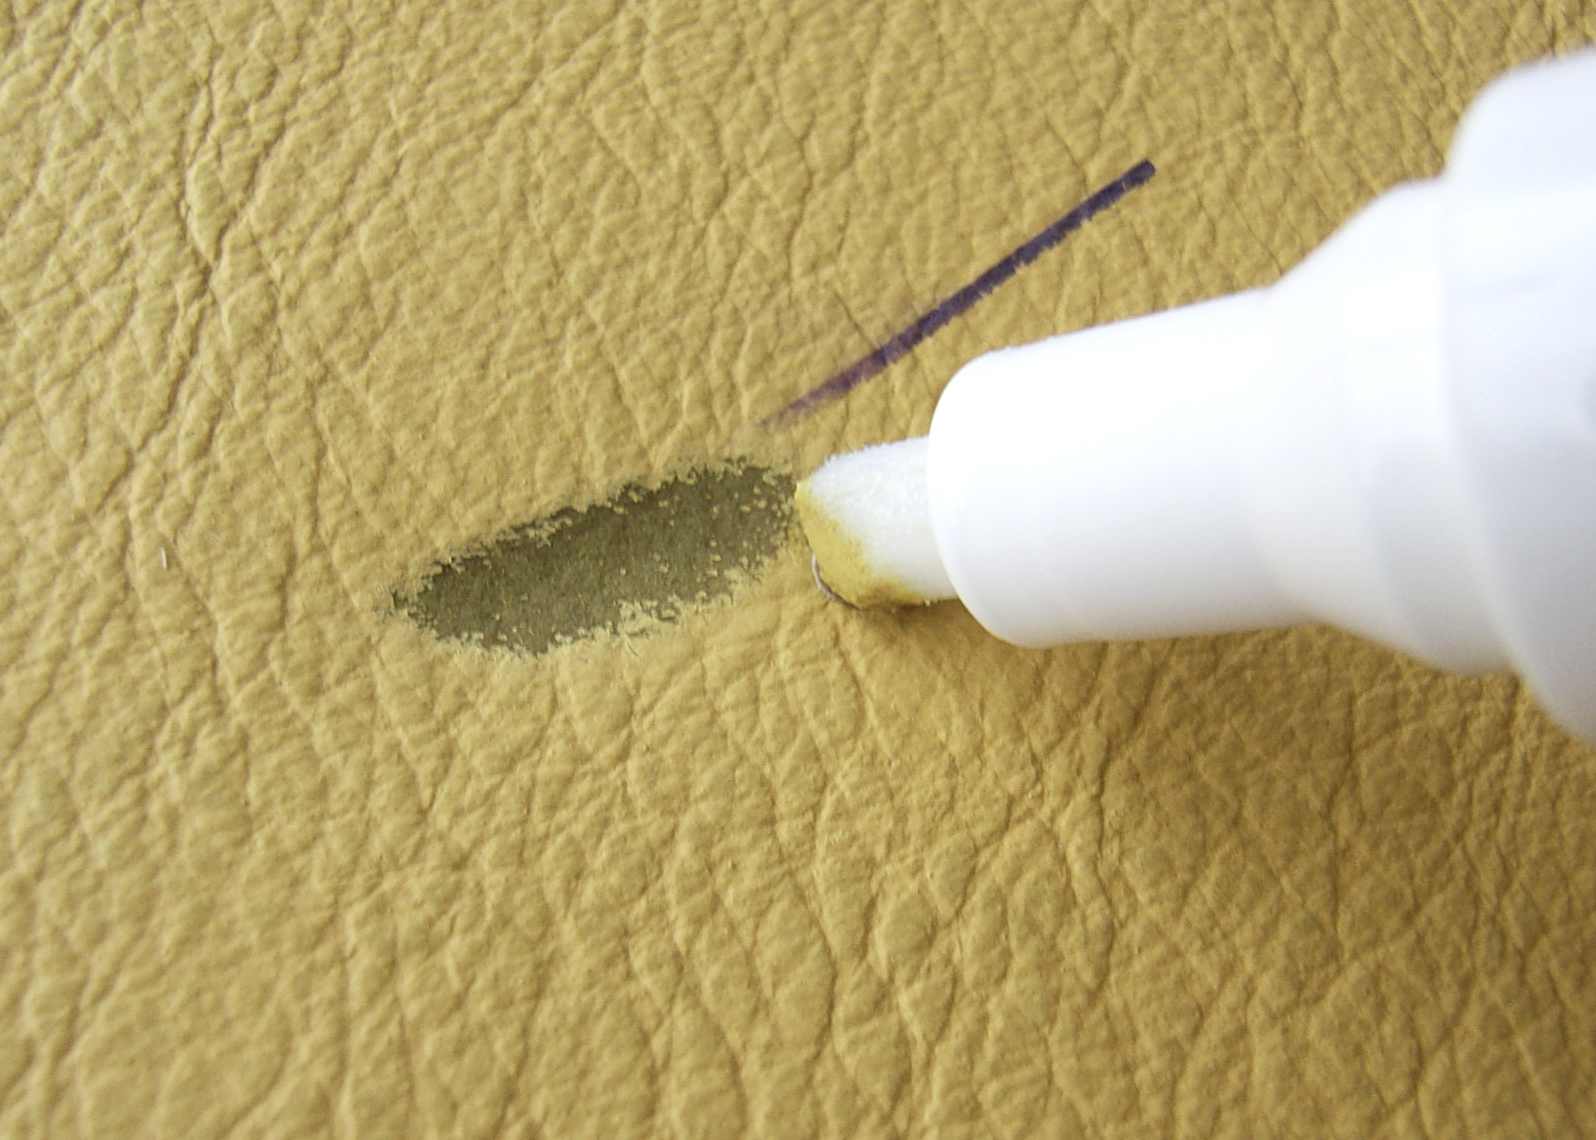 Biro Ballpoint Pen Marks From Leather, How To Clean Pen Marks From White Leather Sofa